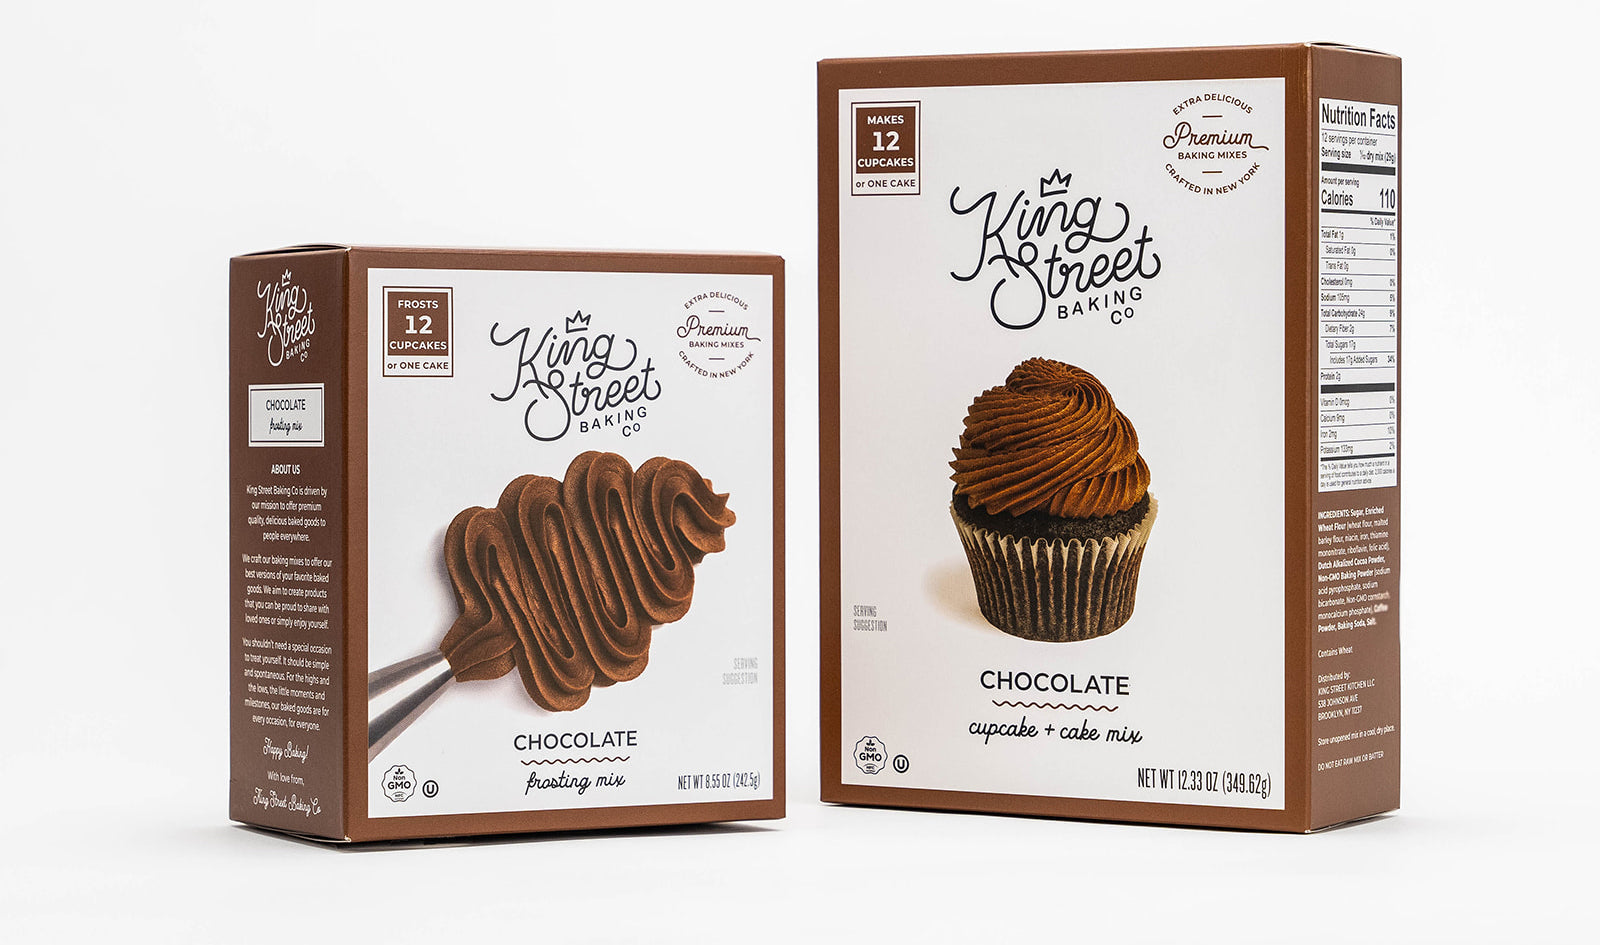 One box of King Street Baking Co.'s Chocolate Frosting Mix (left) next to one box of Chocolate Cupcake and Cake Mix.